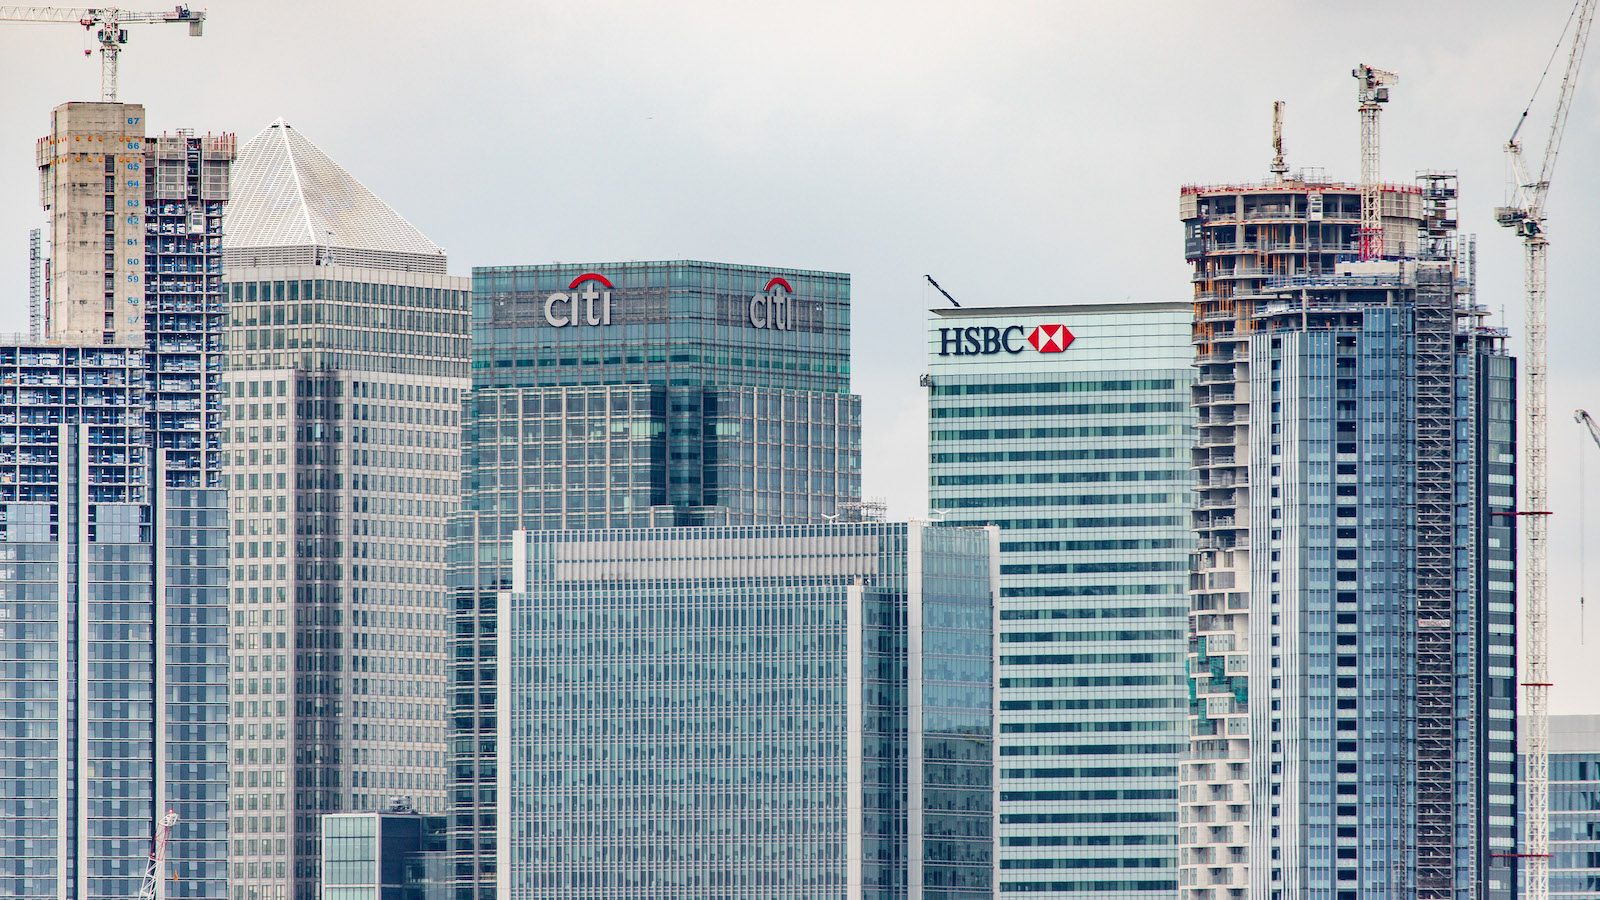 London skyline featuring Citi Bank building and HSBC building